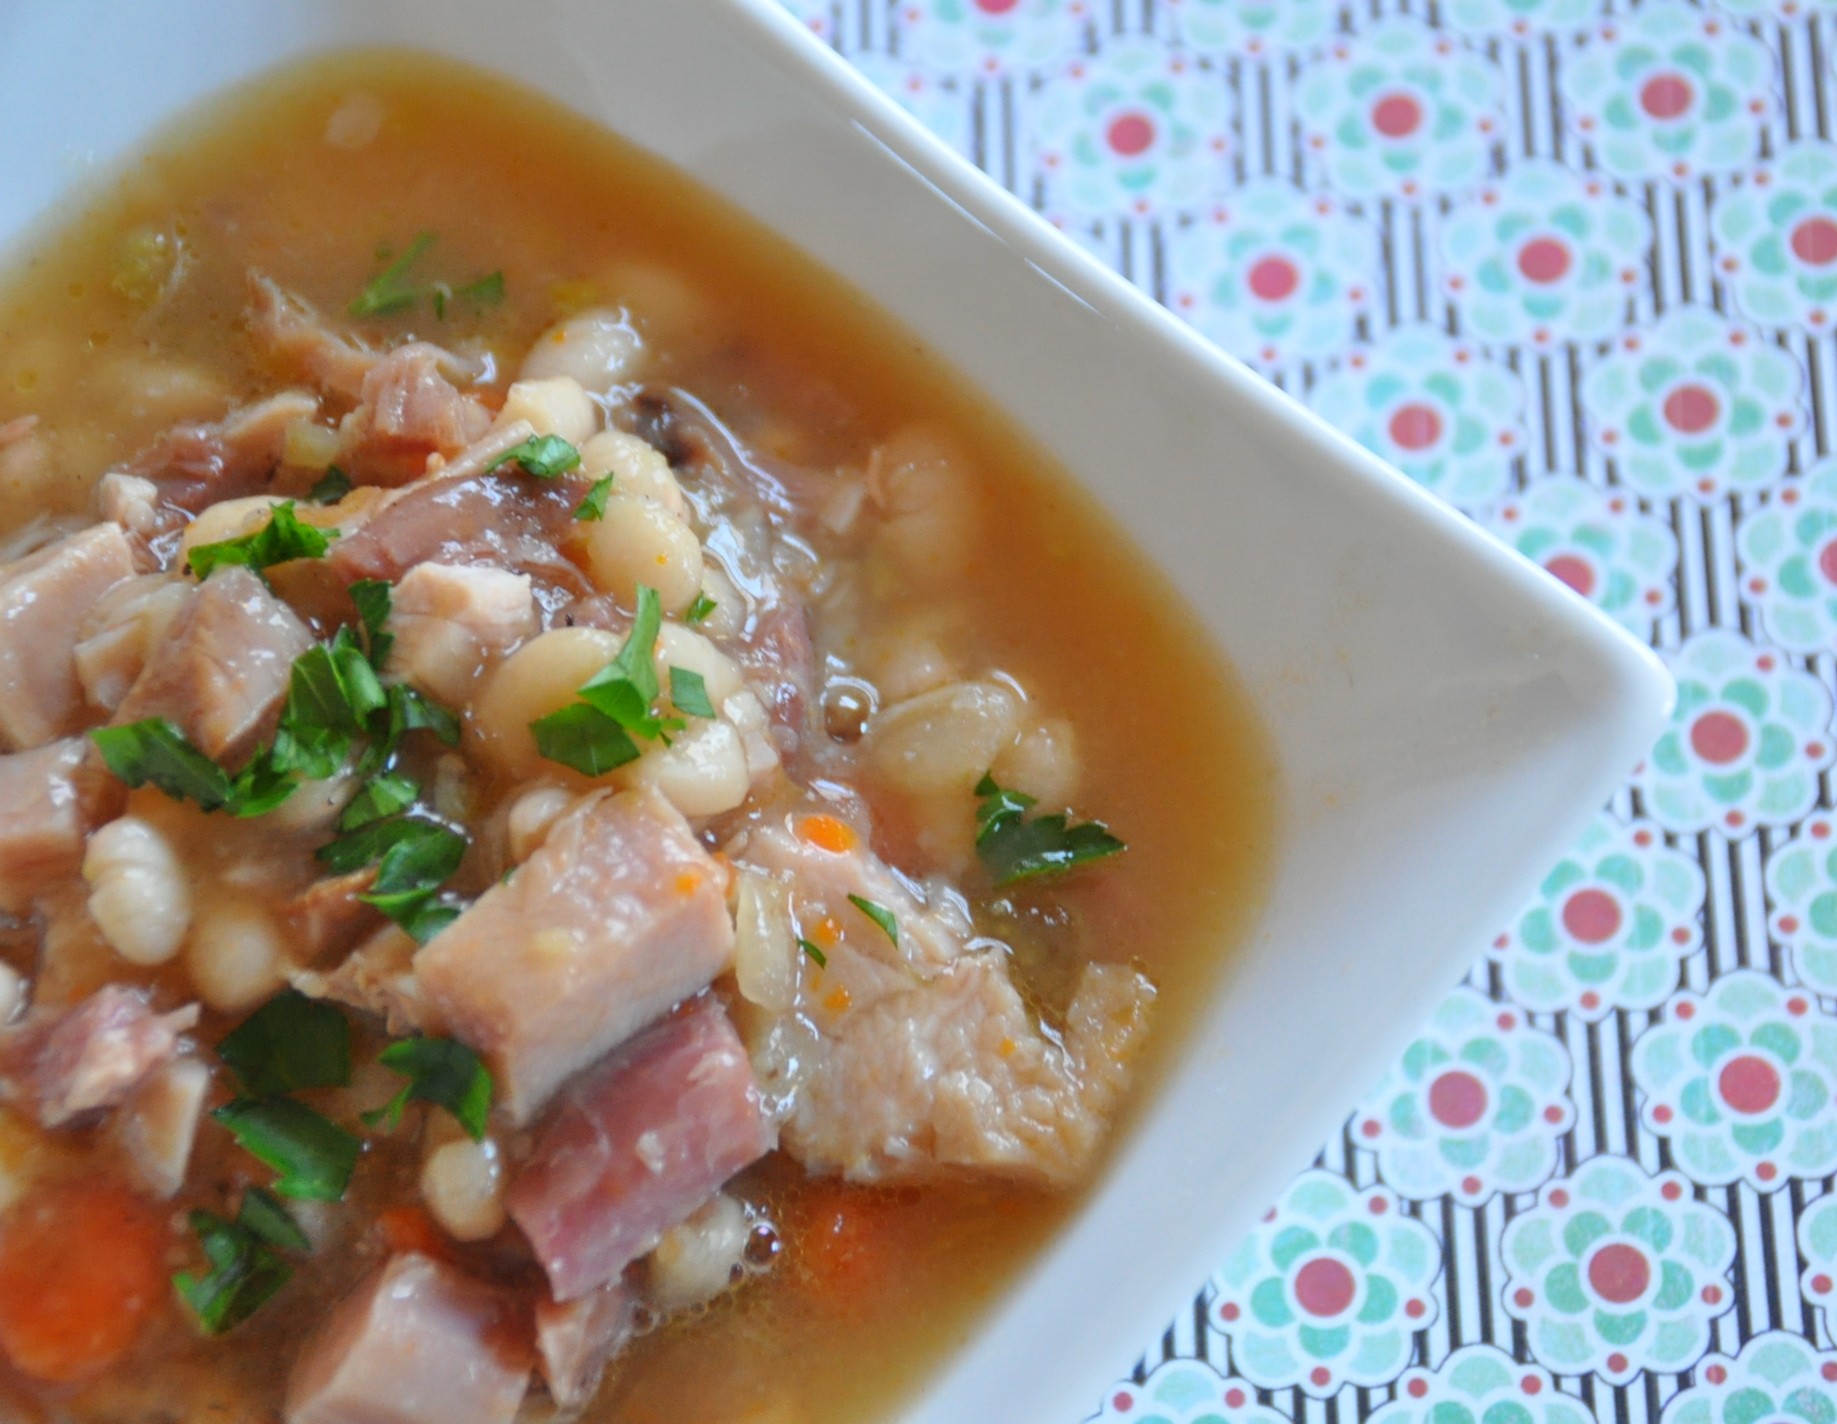 Smoked Turkey Wings and White Bean Dressing - The Local Palate